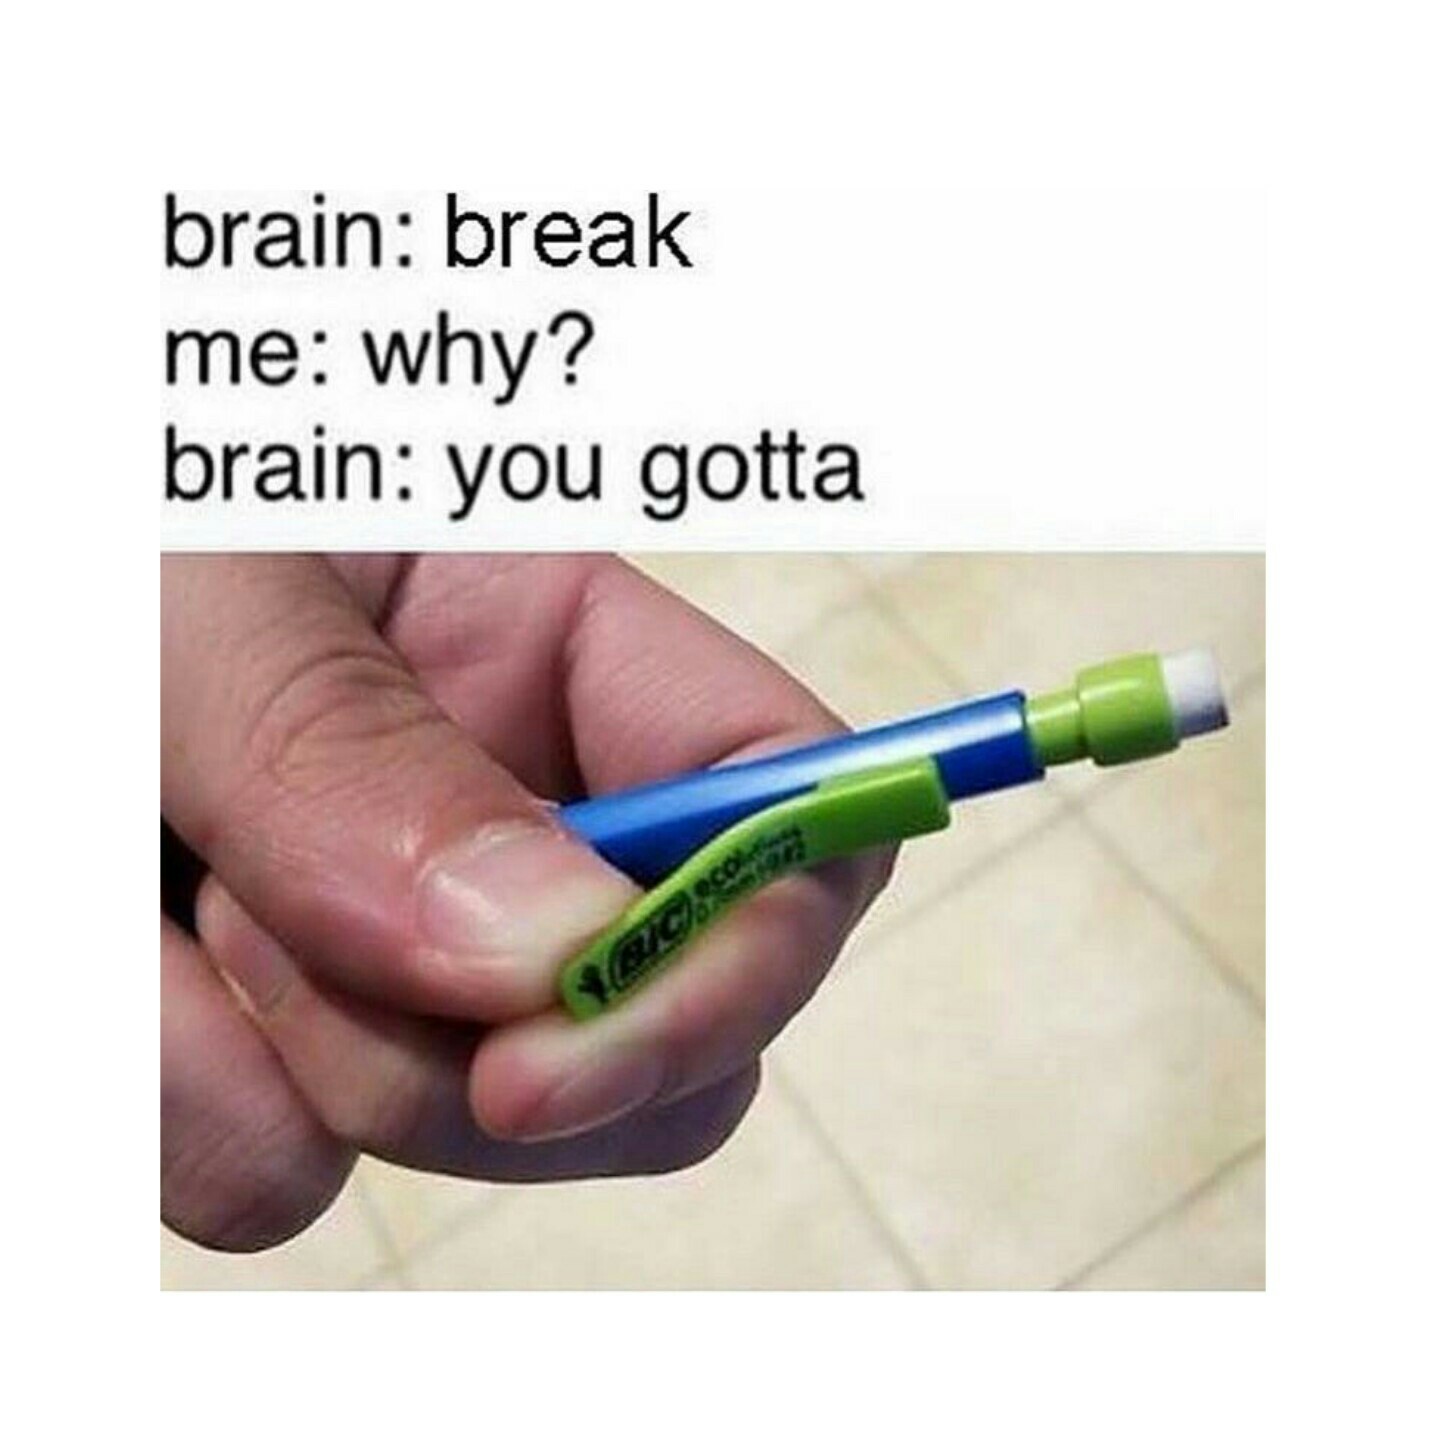 Same tho my friends would hate it when I borrowed their pencils because I would always break them idk why